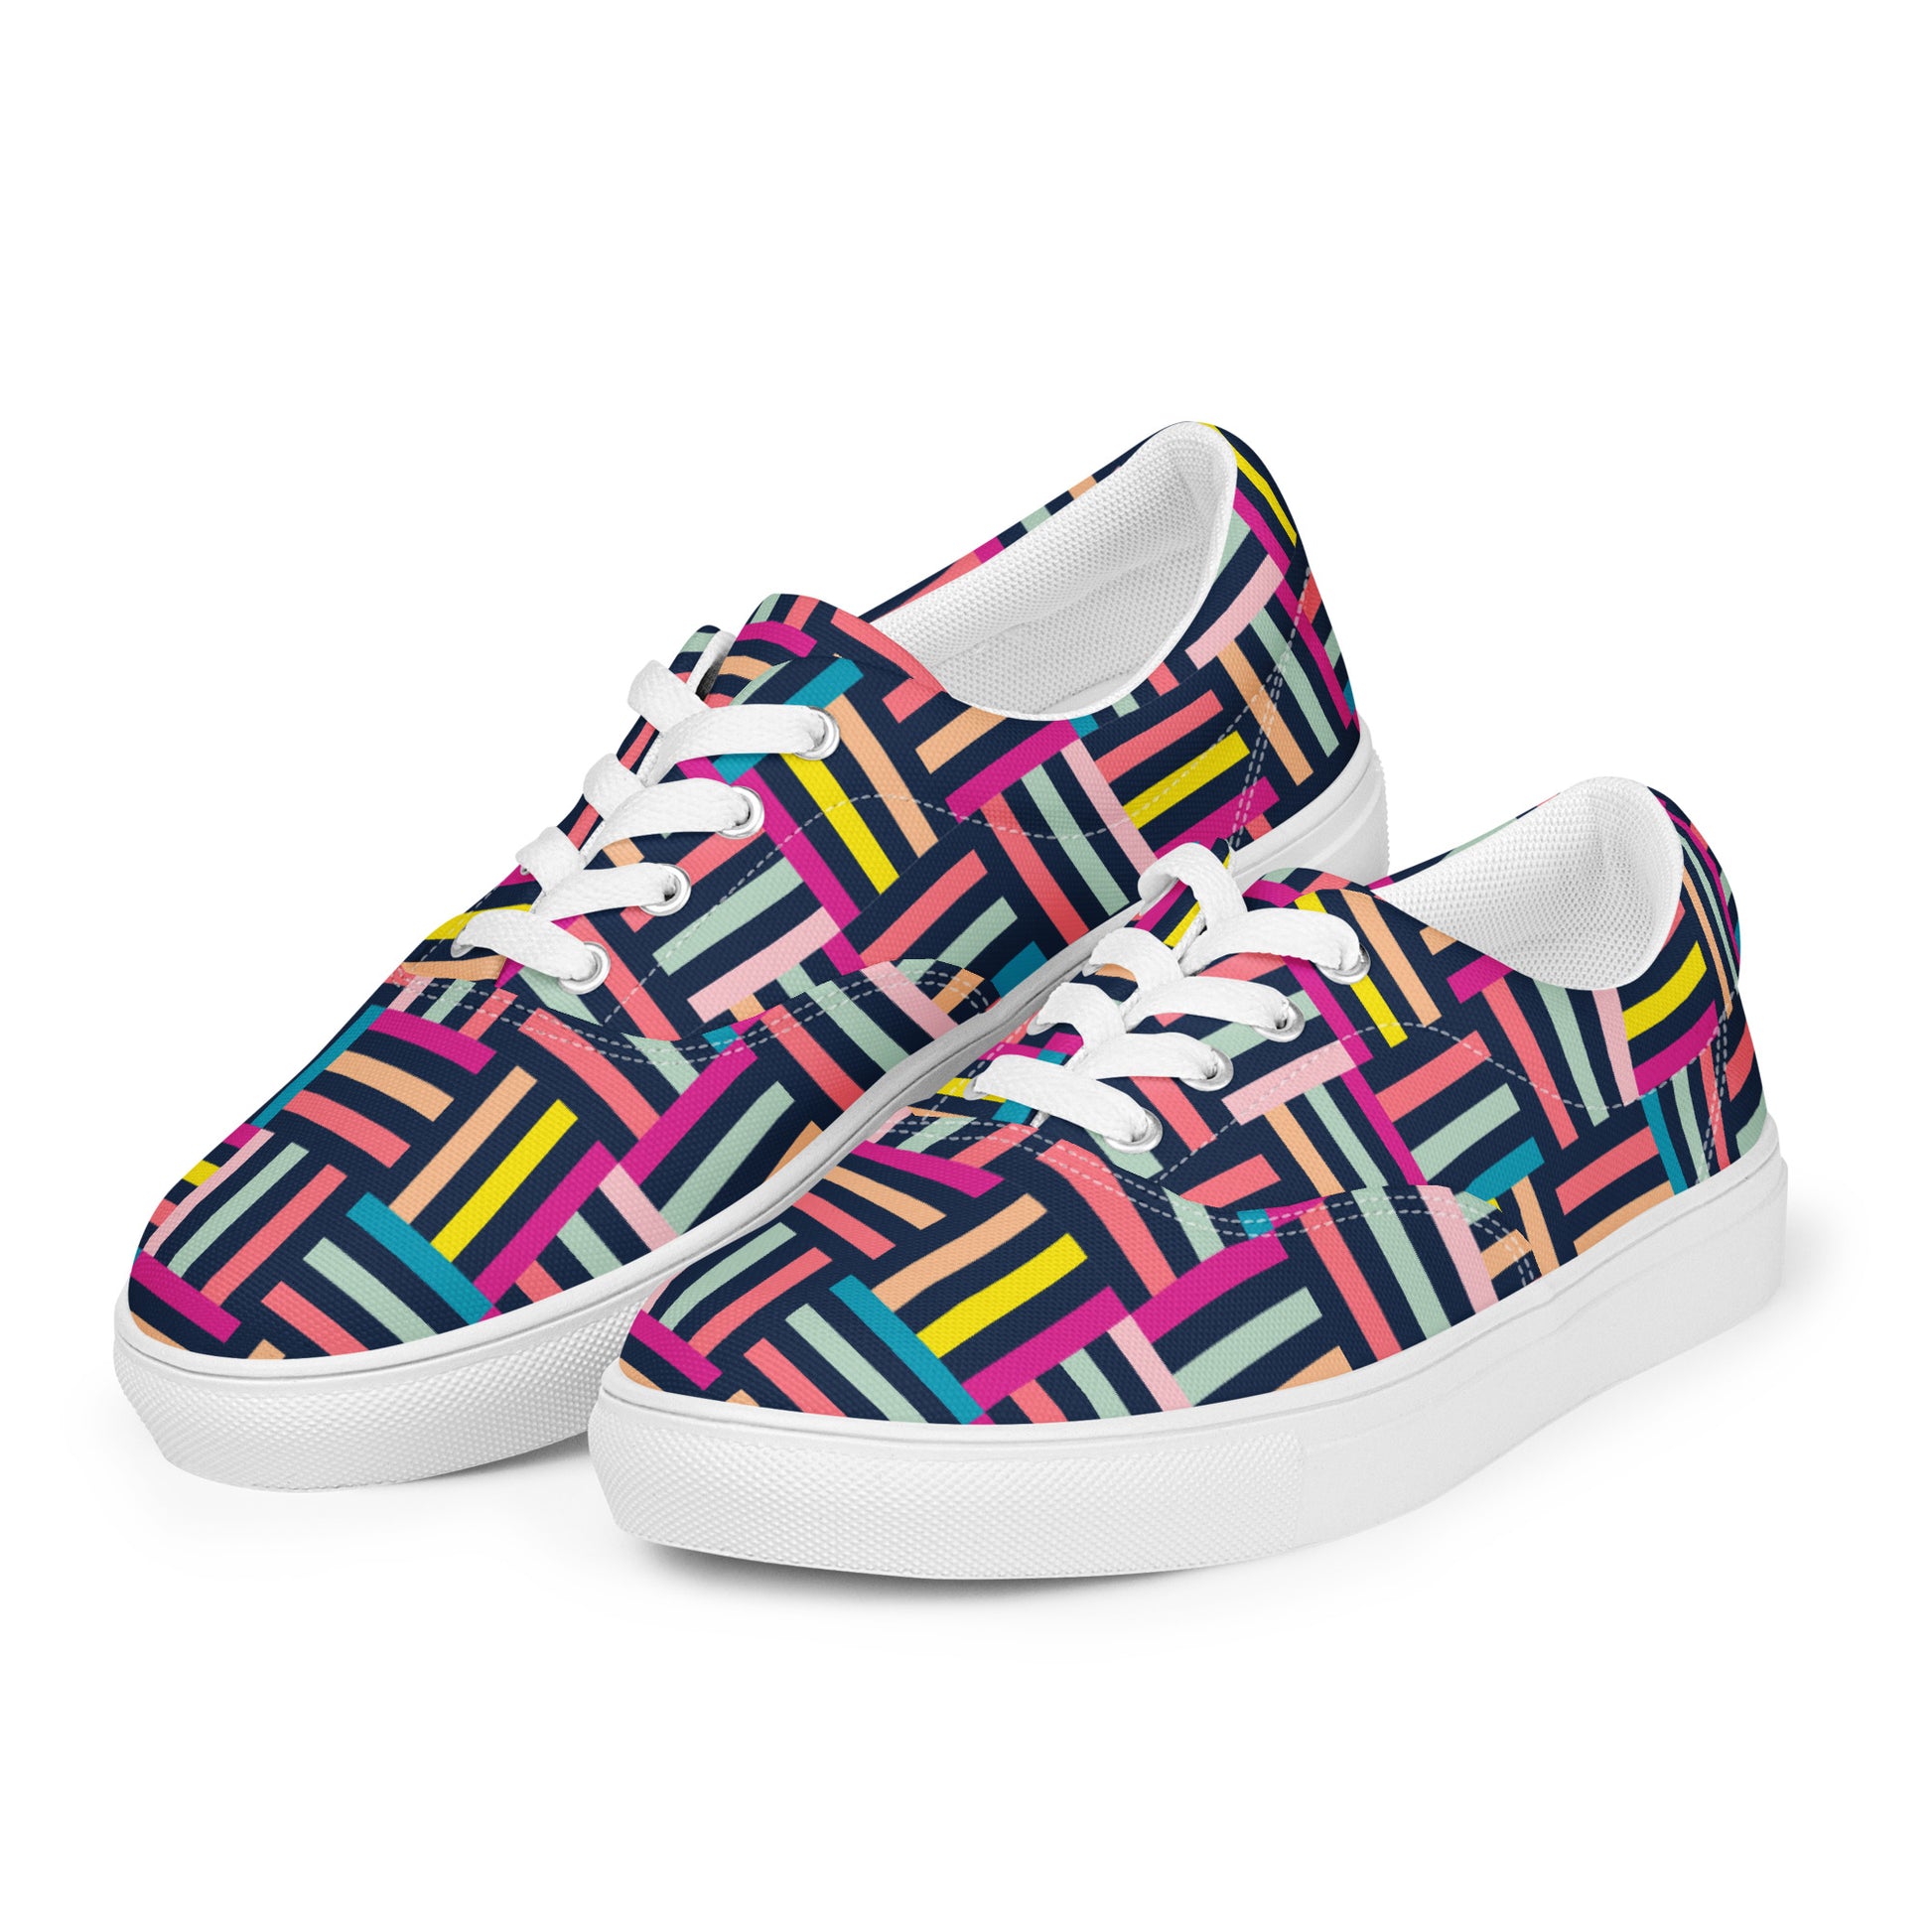 Allsorts - Women’s lace-up canvas shoes Womens Lace Up Canvas Shoes